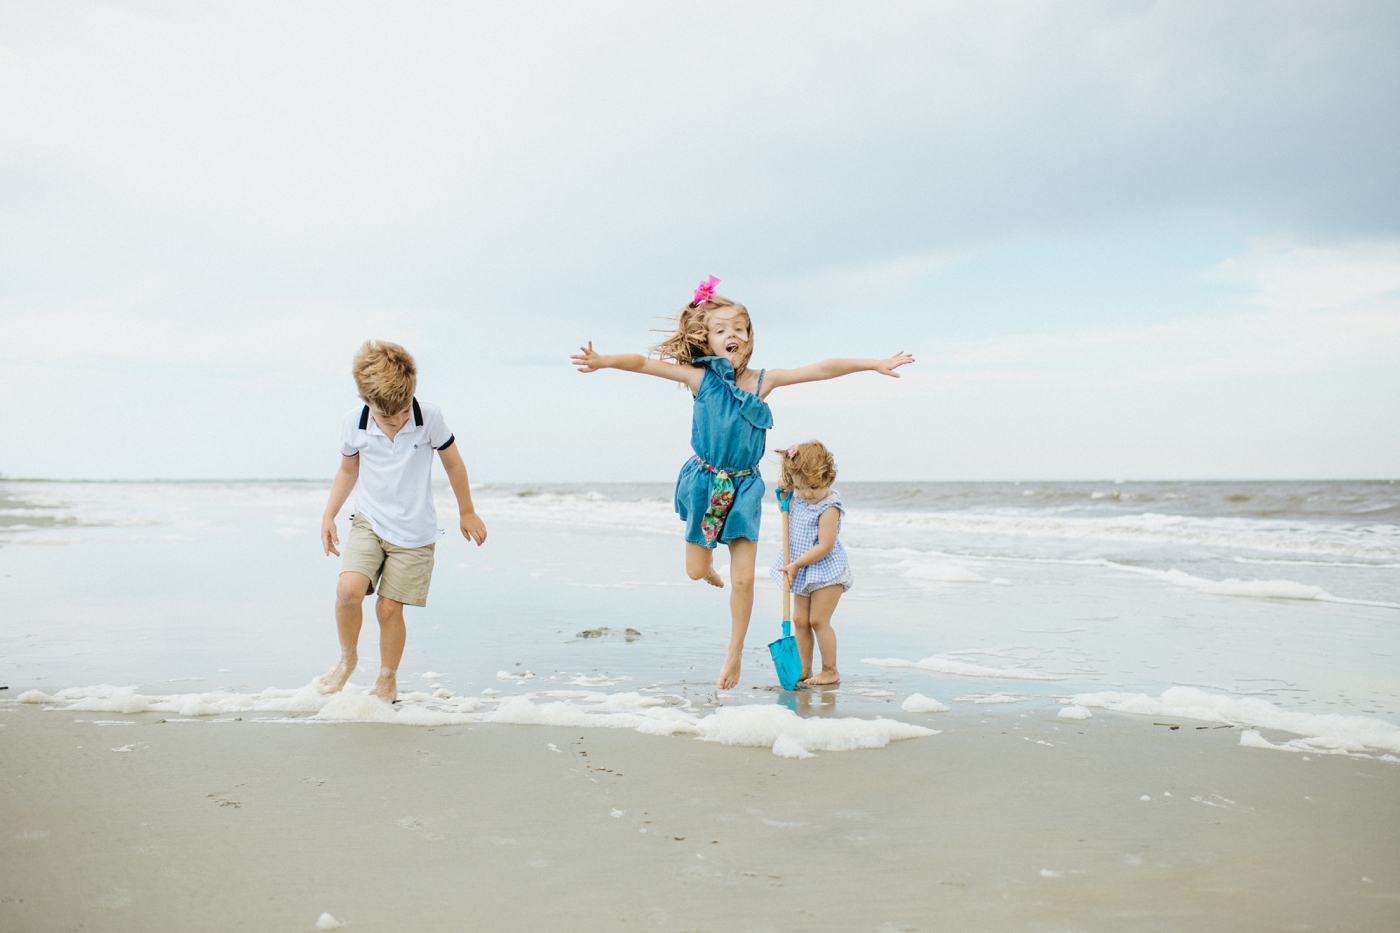 A cute family photo shoot on the beach at sunset on the Golden Isles in Georgia.